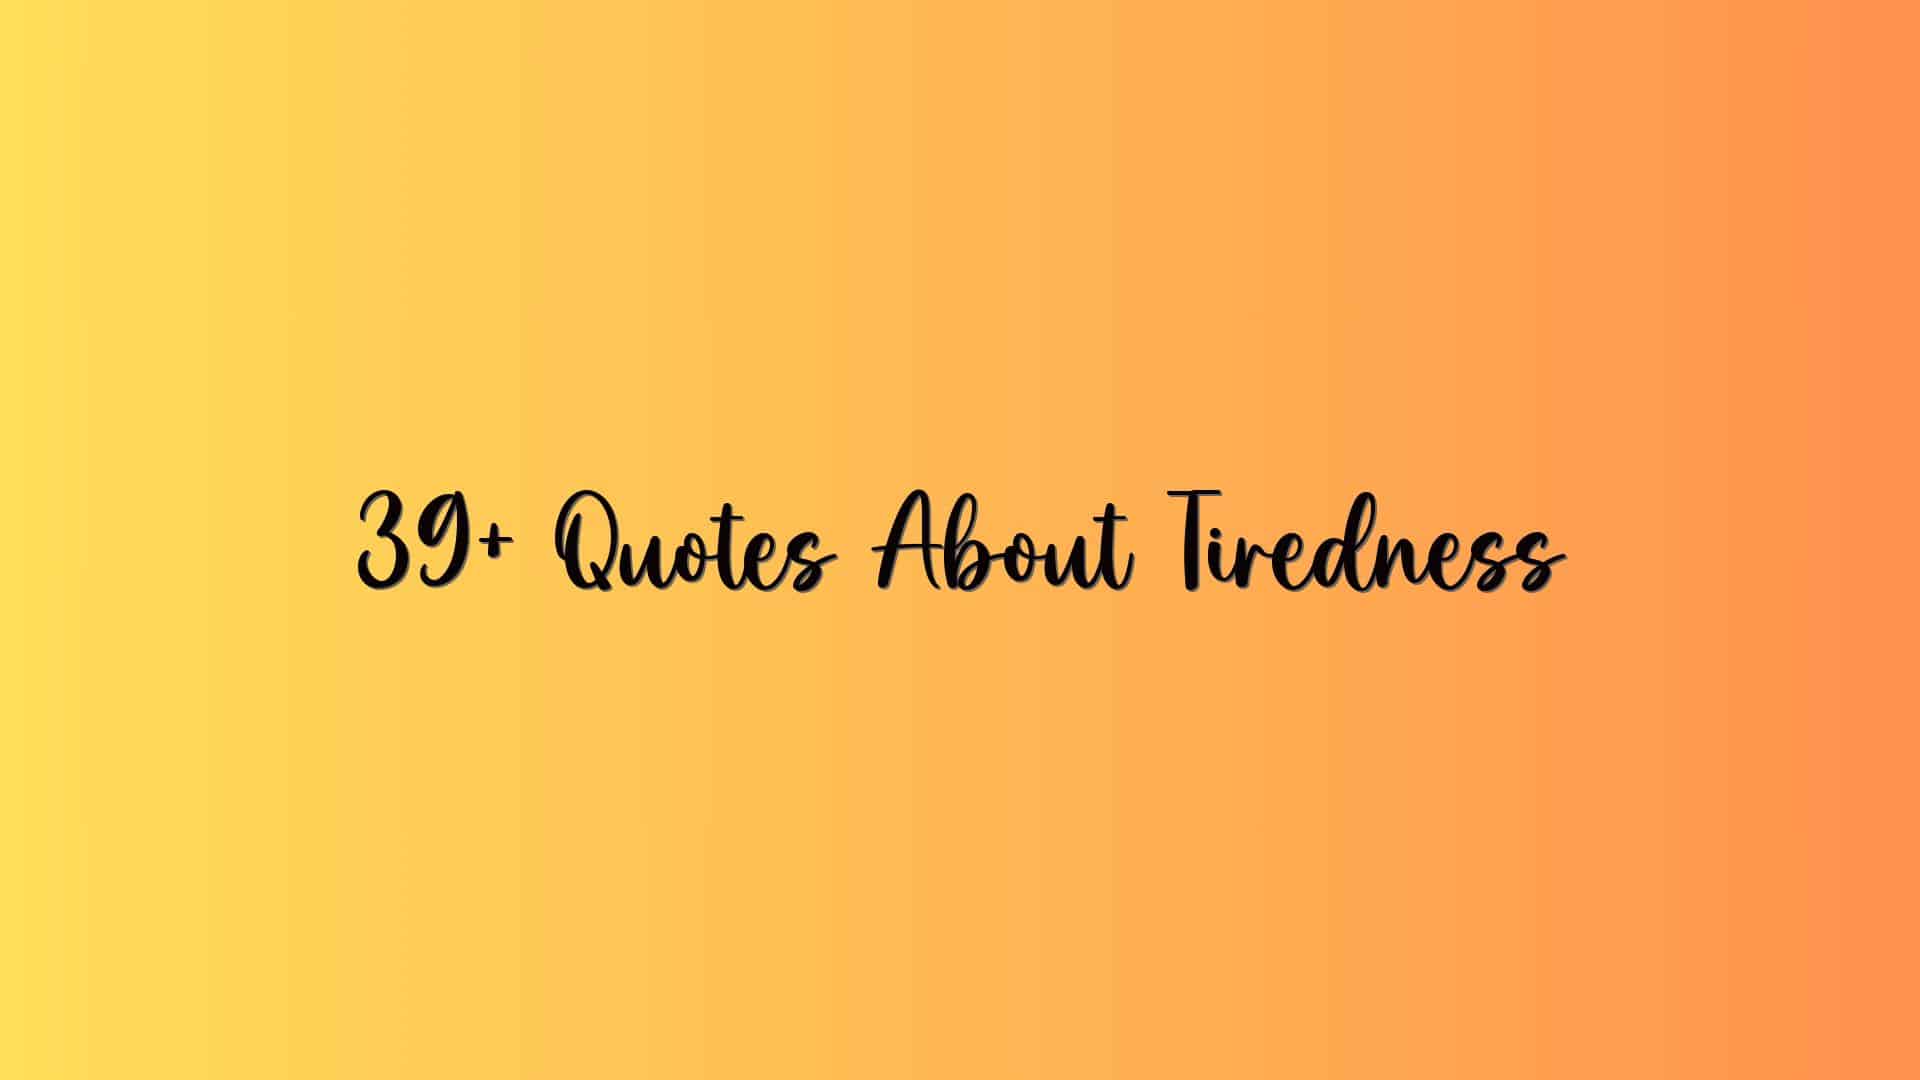 39+ Quotes About Tiredness